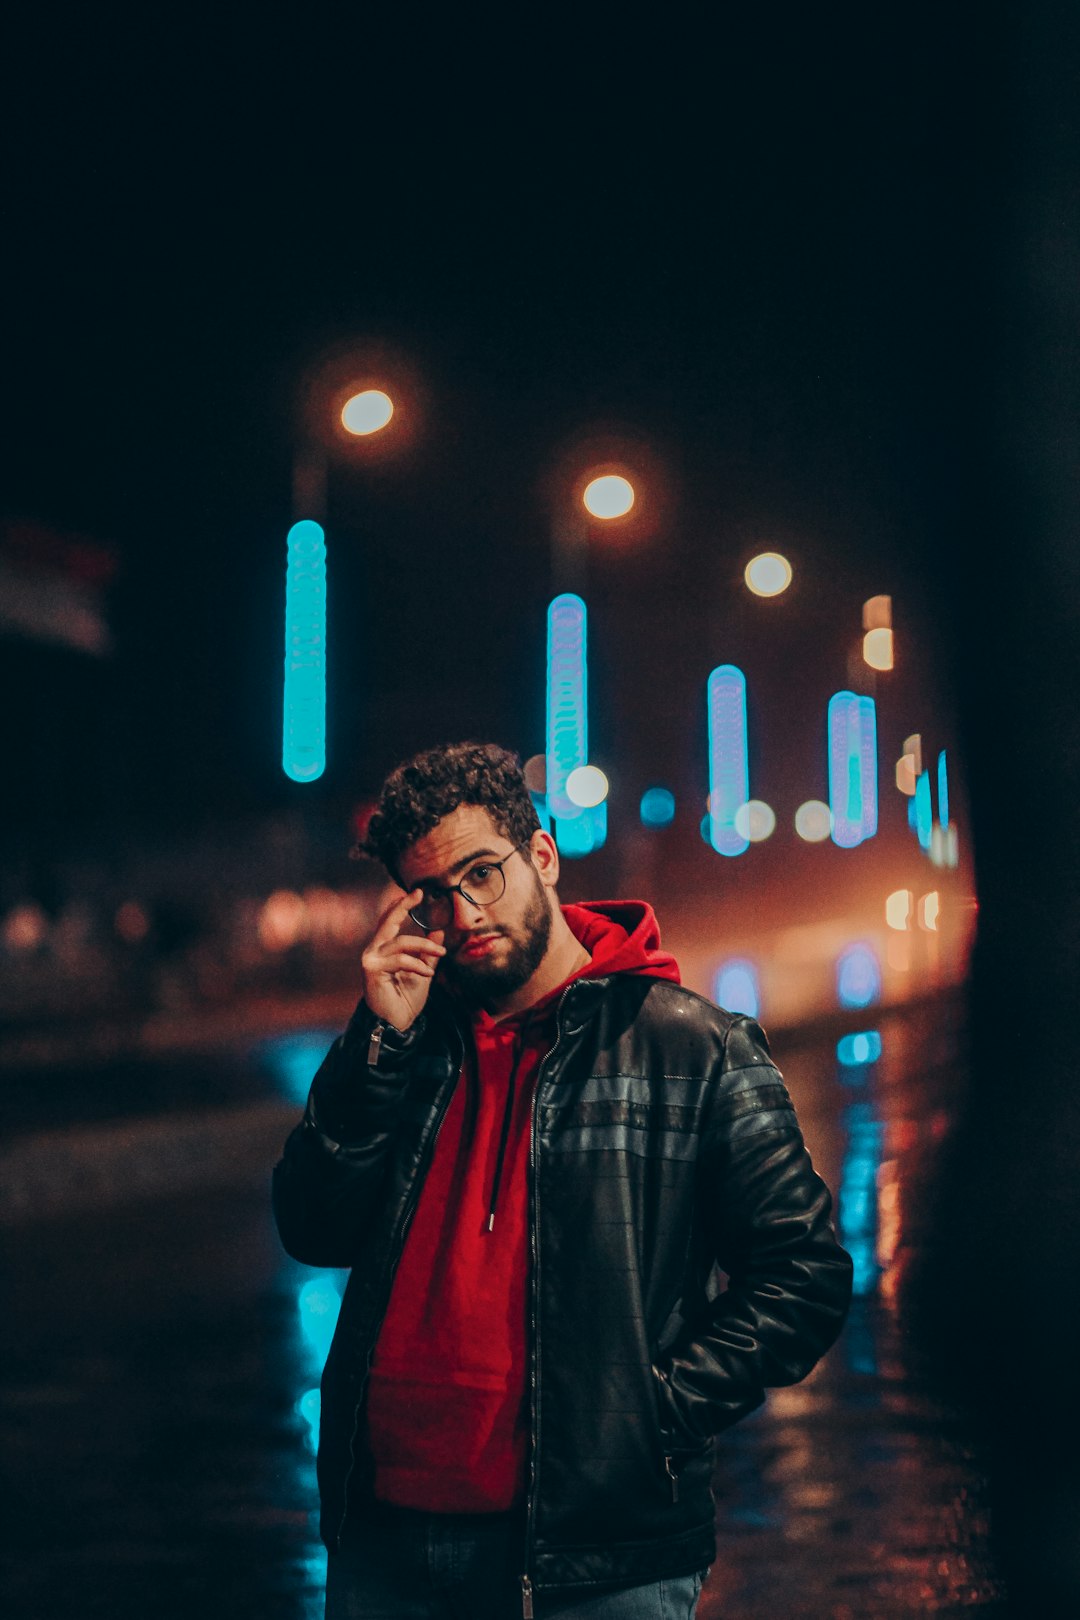 man in black leather jacket standing near street lights during night time